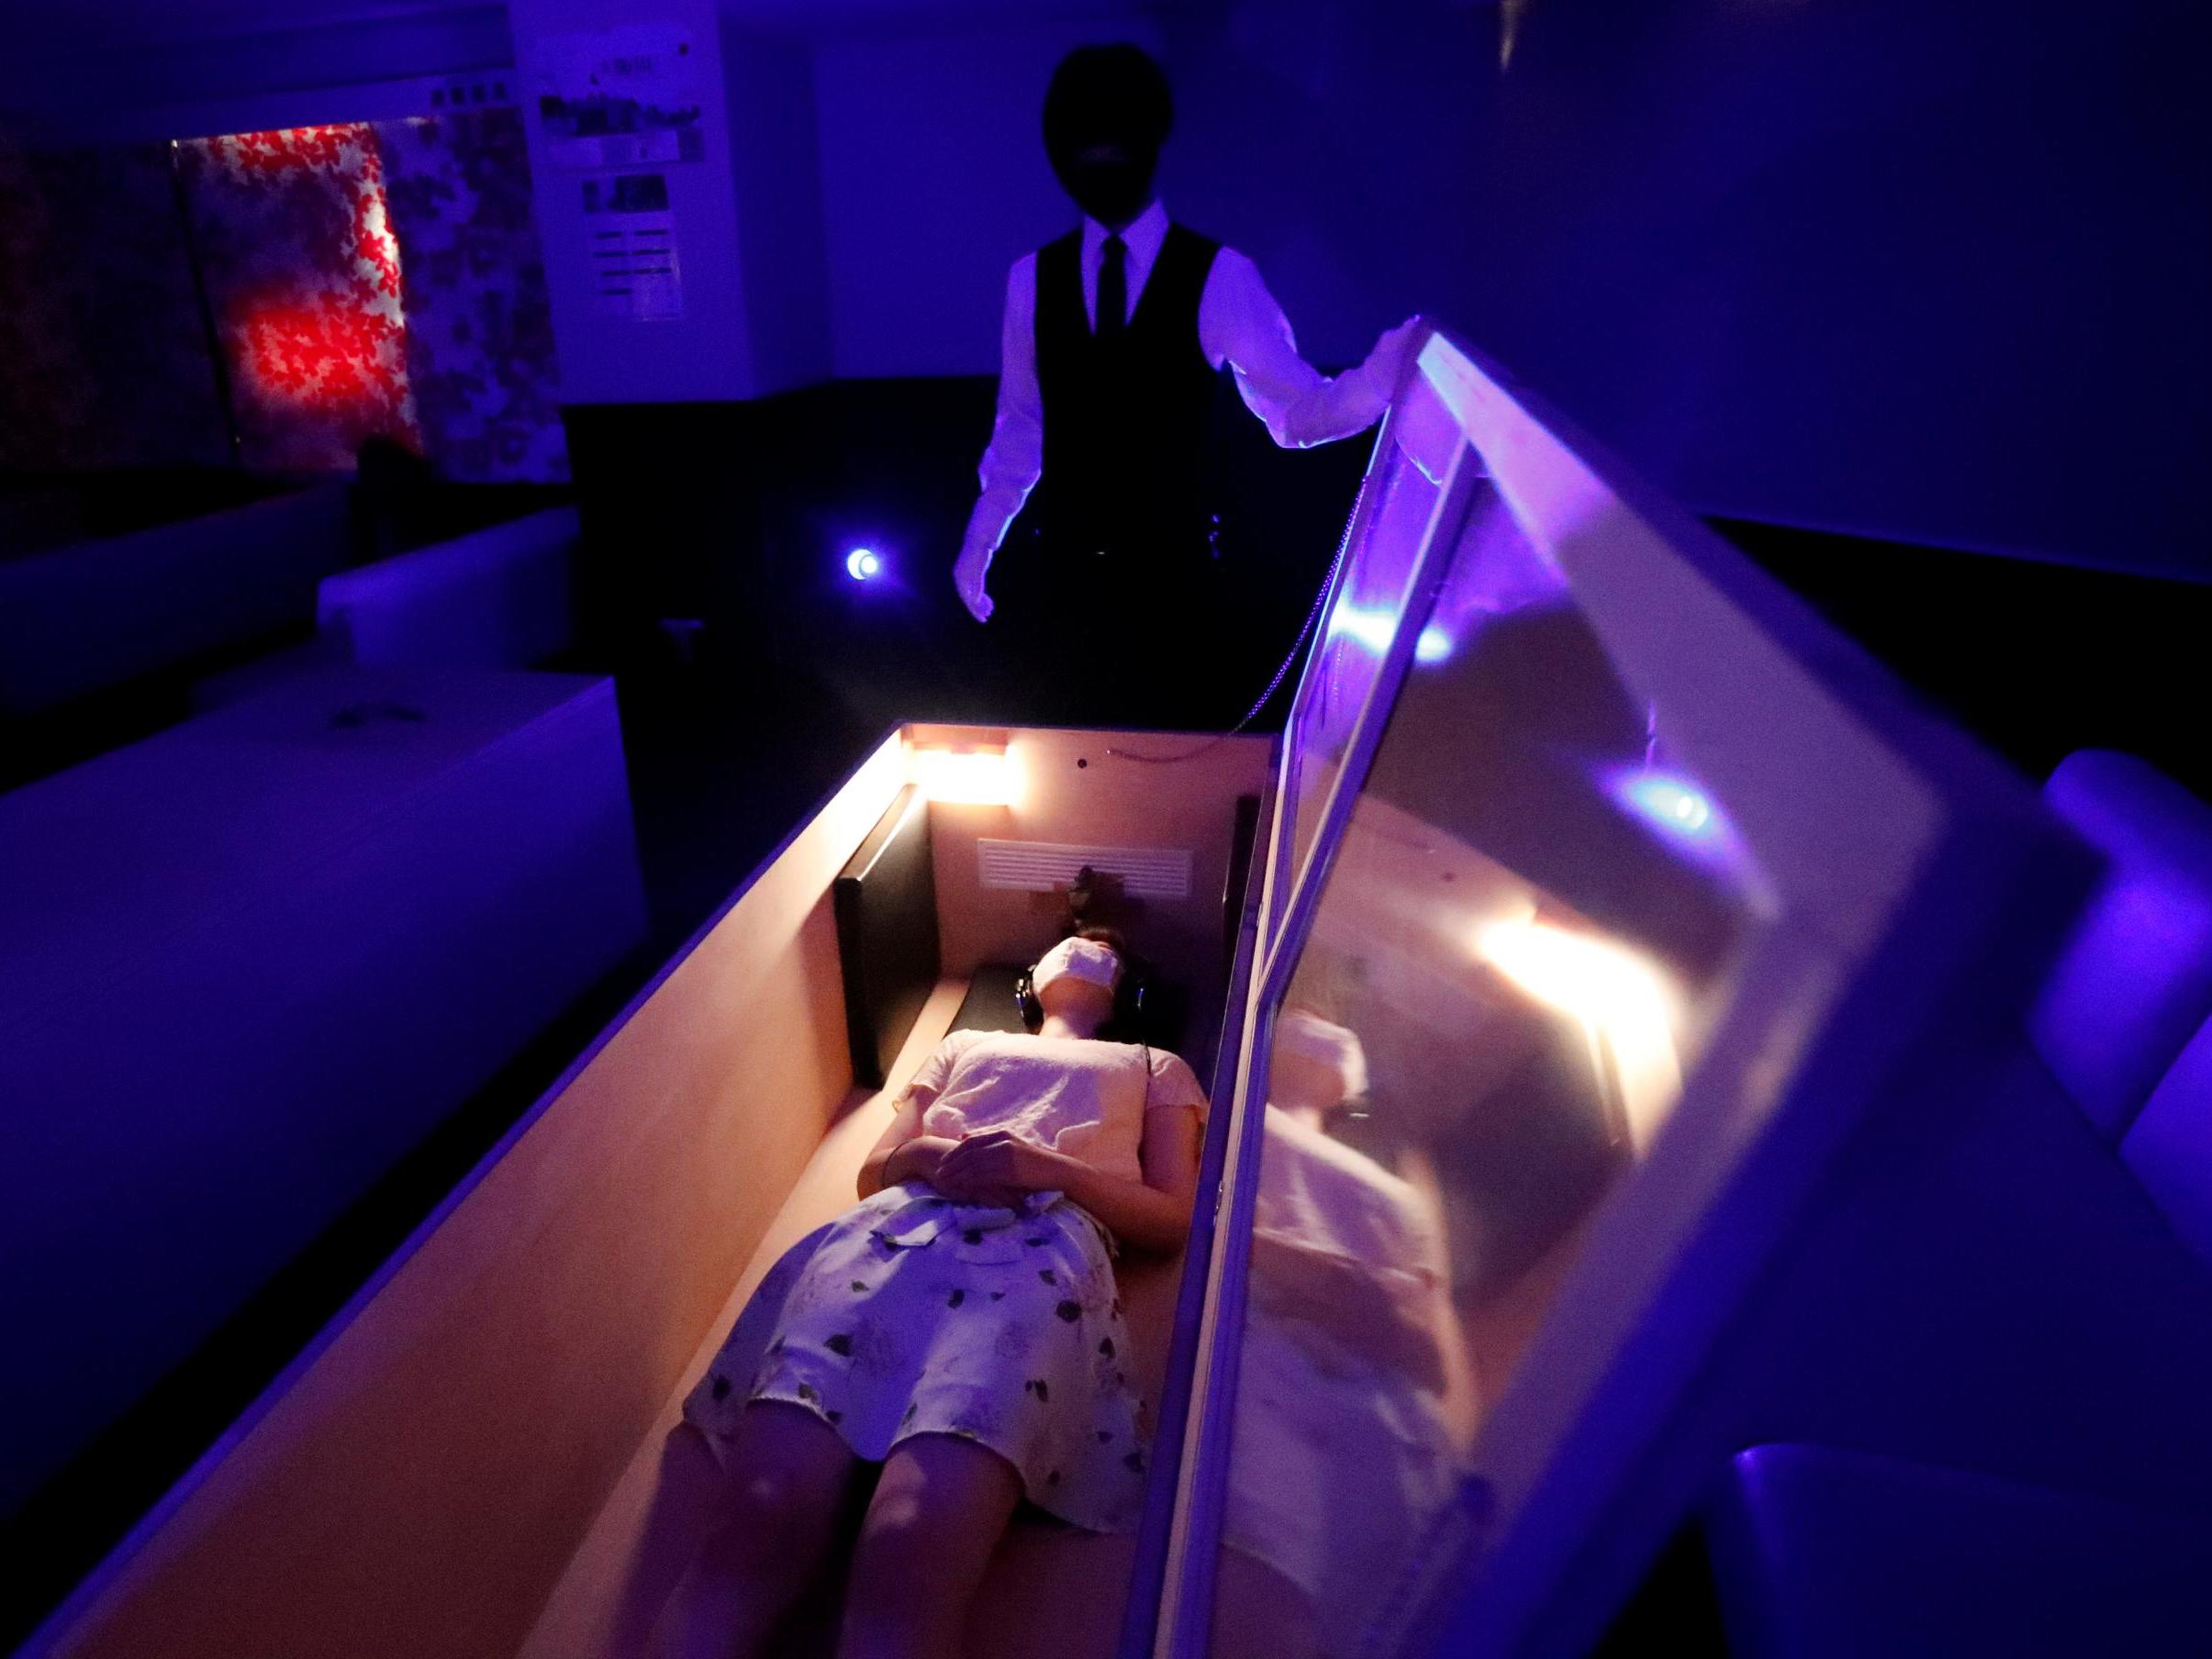 A participant lies inside a mock coffin with plastic shields to maintain social distancing amid the spread of the coronavirus